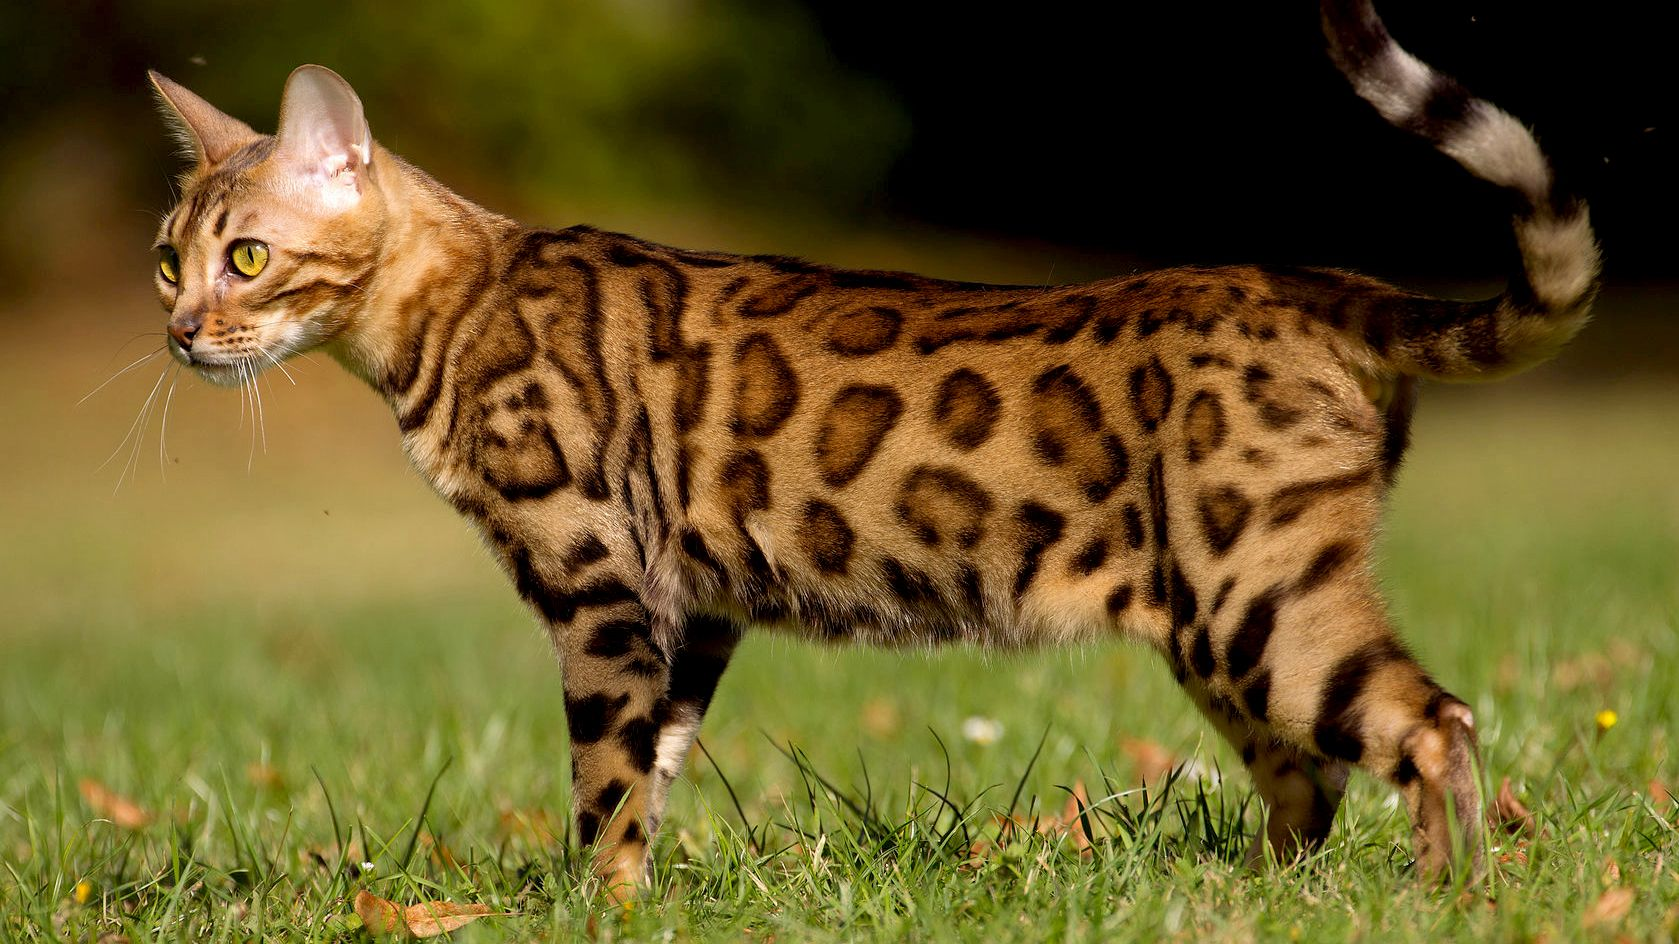 Side view of a Bengal cat walking on grass